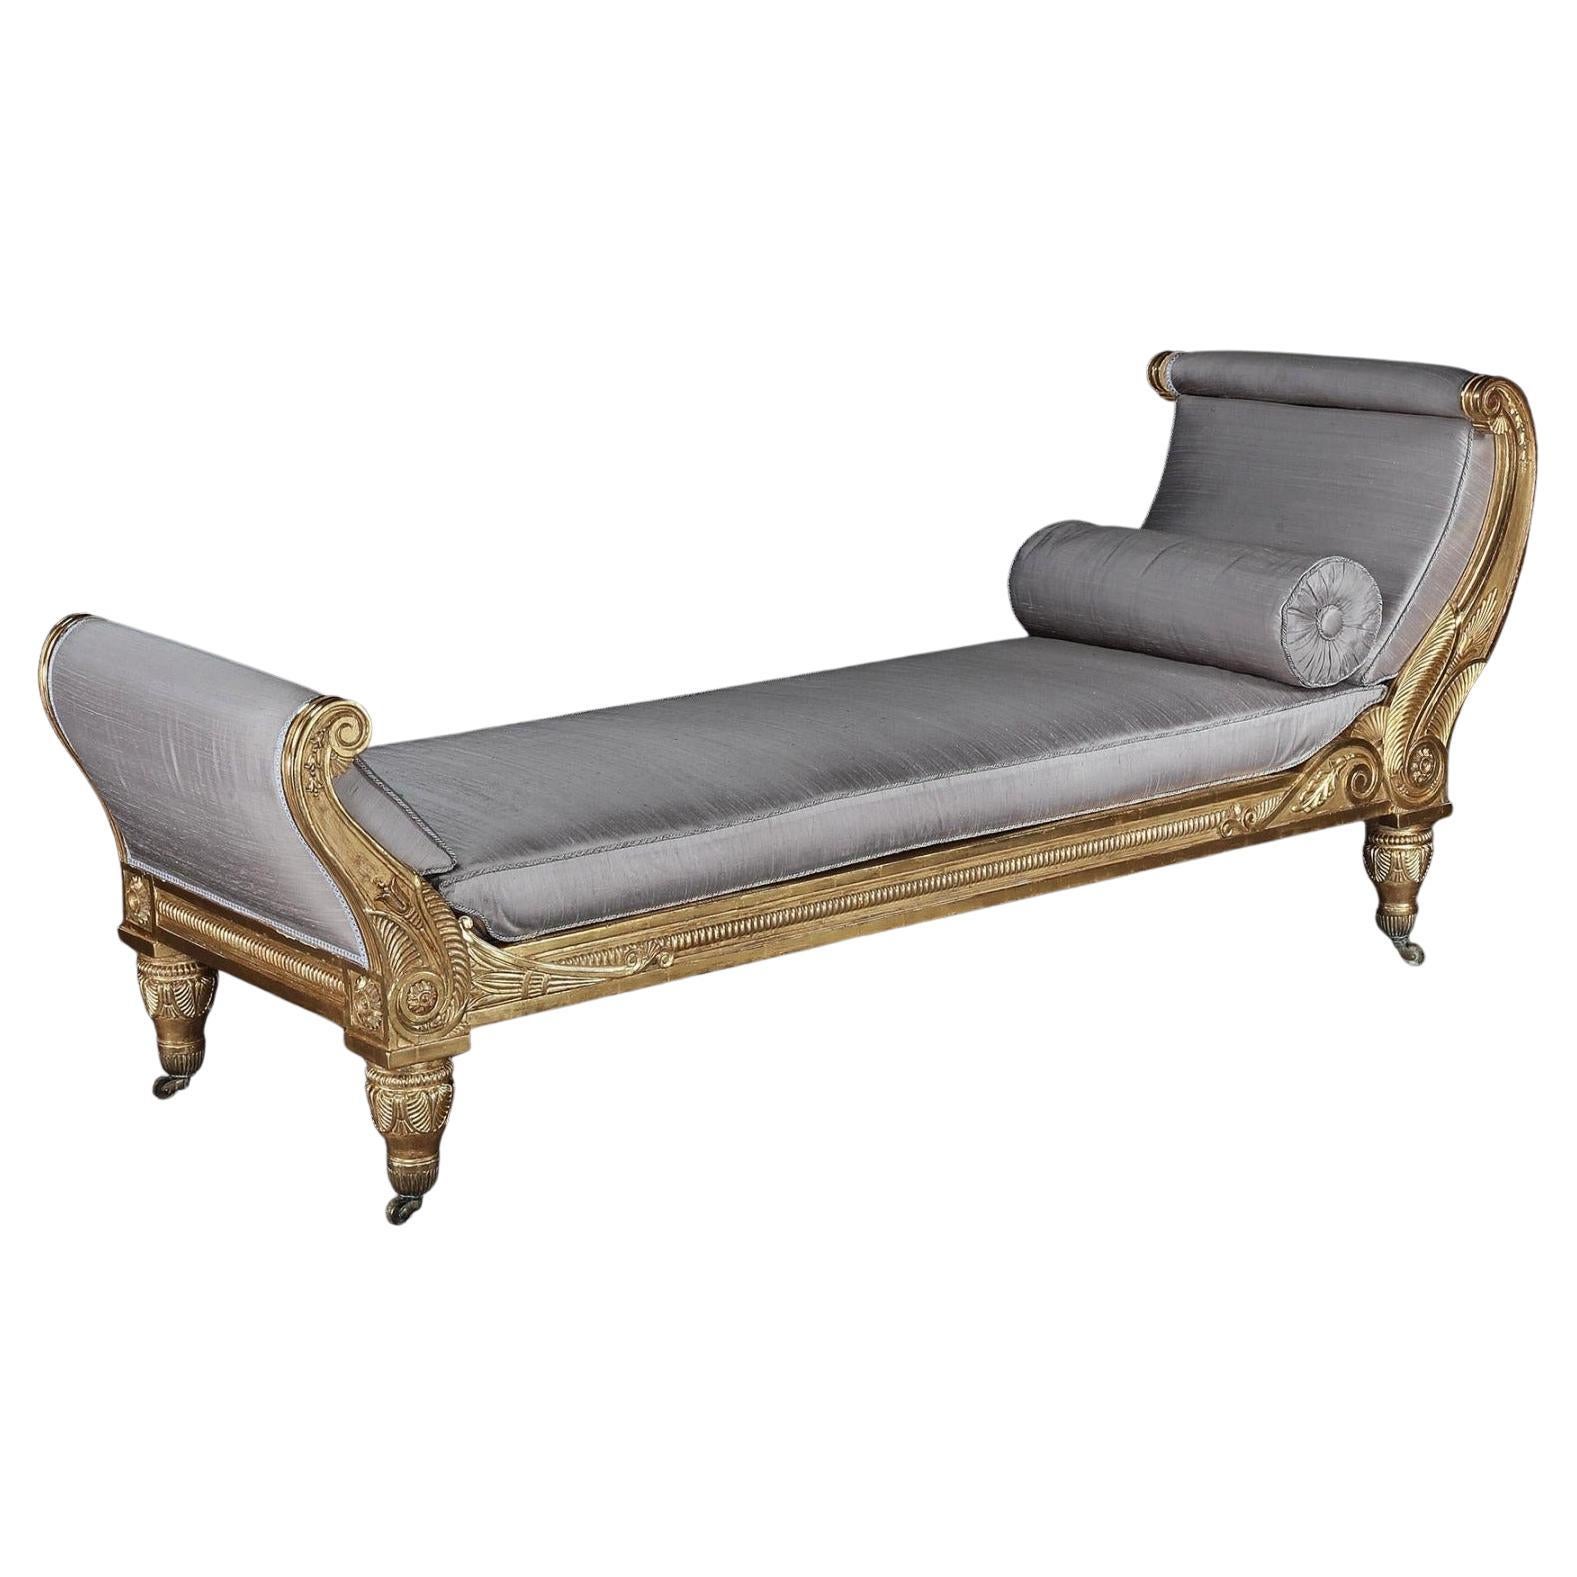 Morel and Hughes Regency Carved Giltwood Daybed Likely Made for Badminton House 